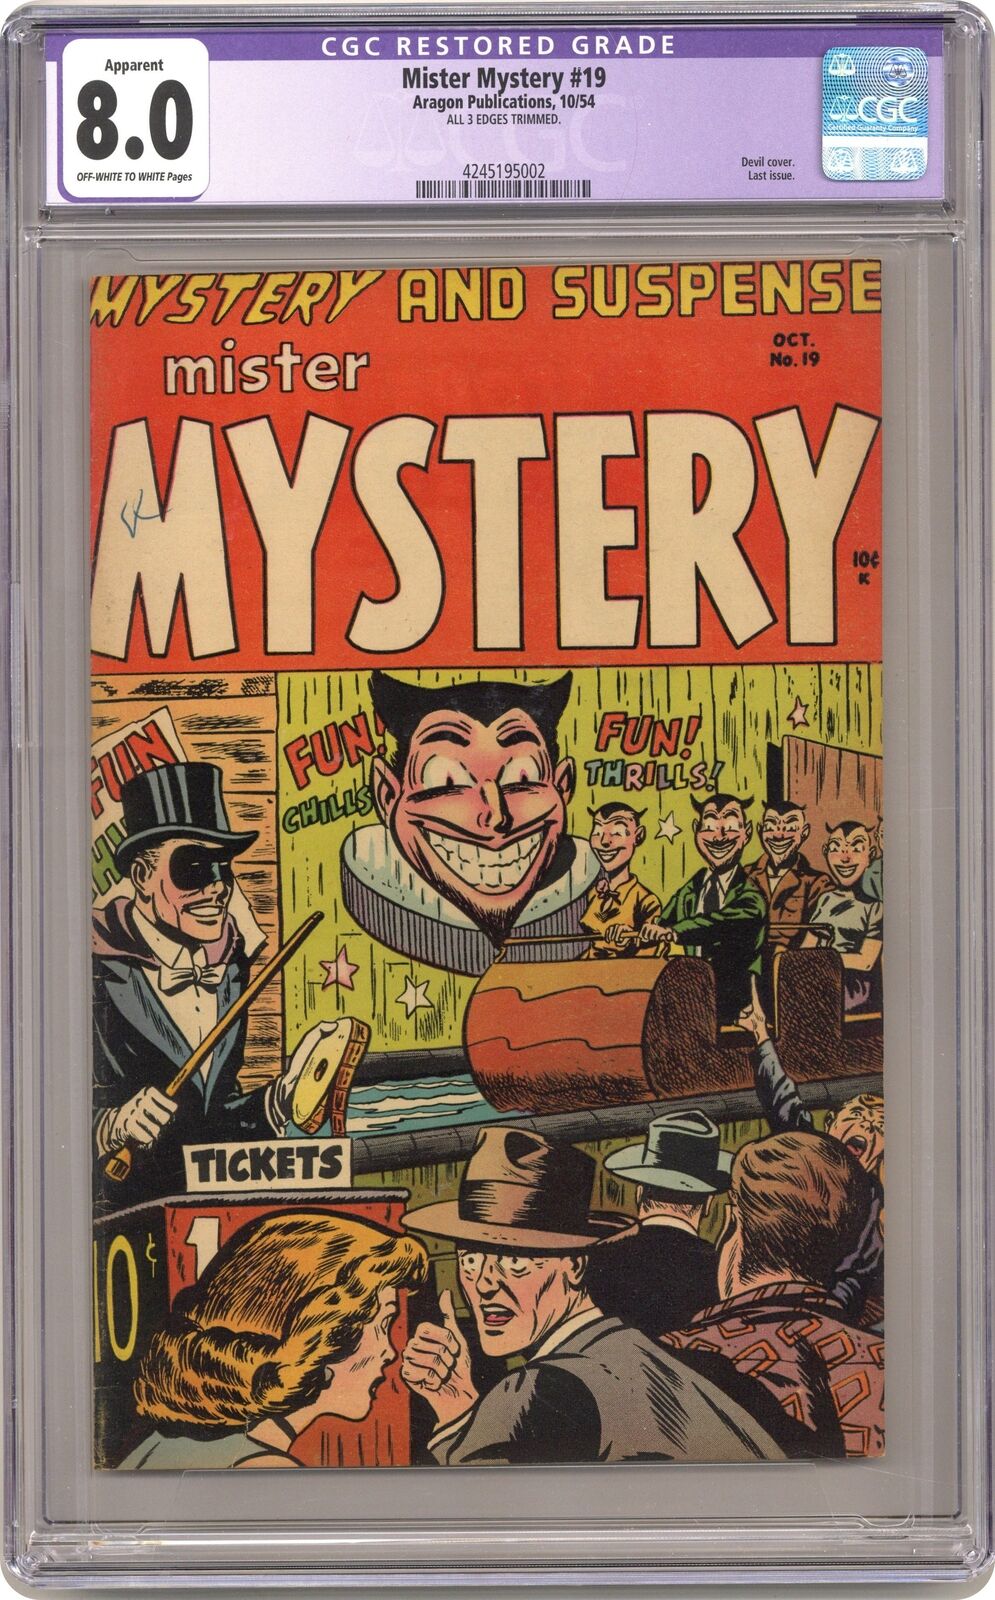 Mister Mystery #19 CGC 8.0 TRIMMED 1954 4245195002